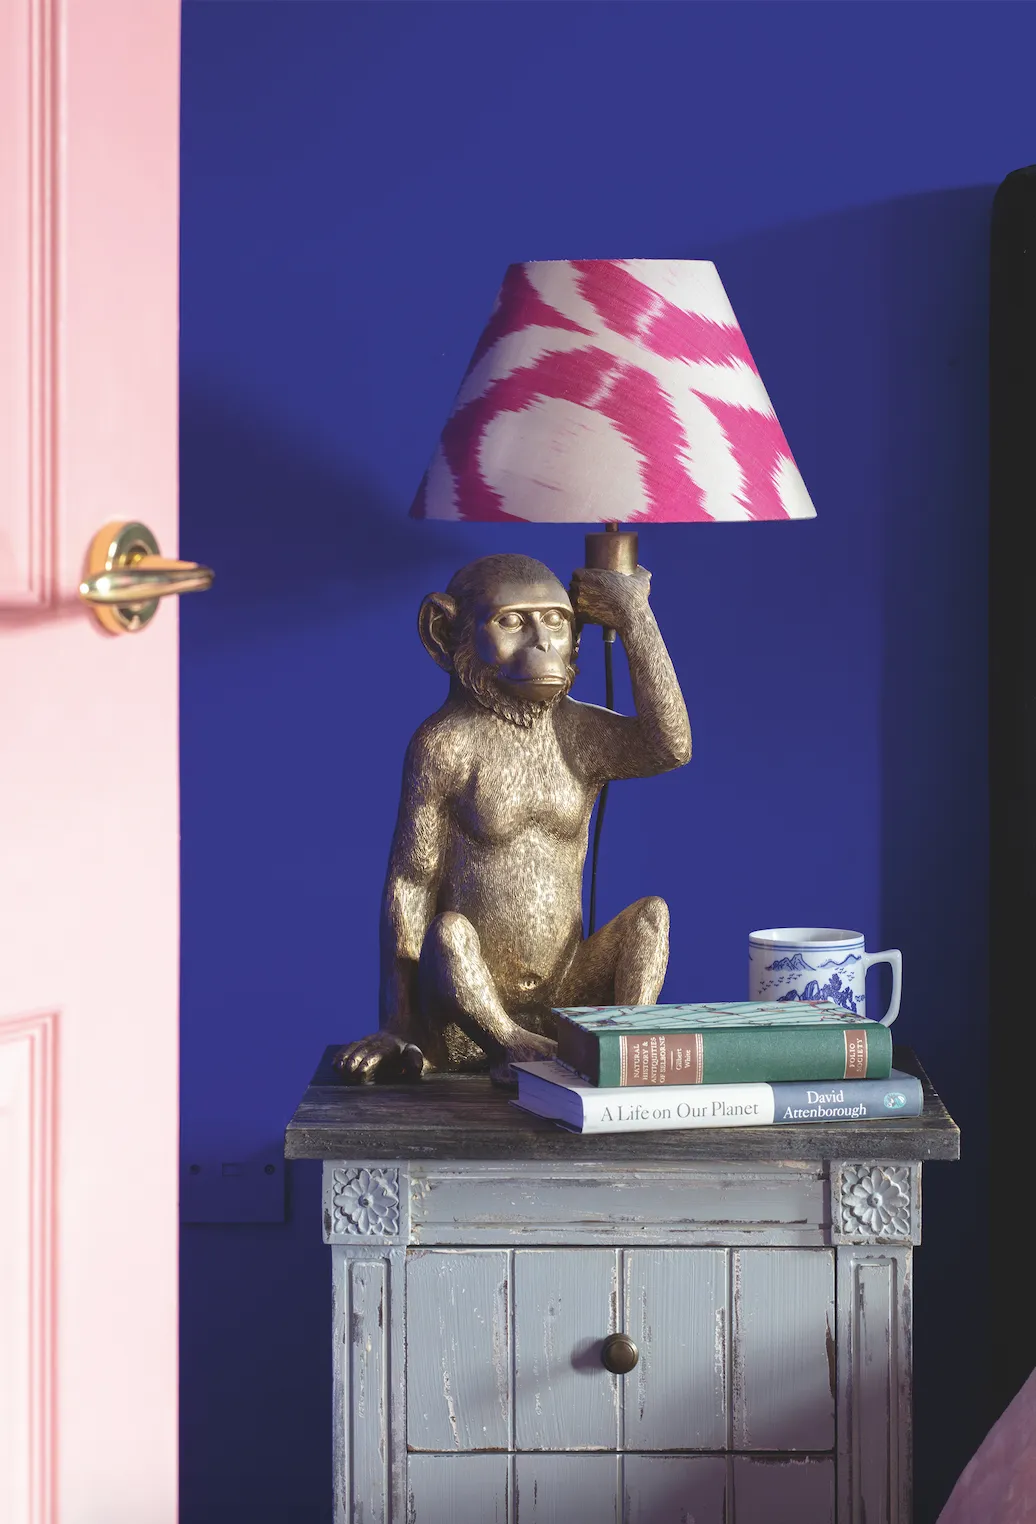 Using a lampshade kit, Anna made the pink ikat shades for her cute monkey lamps herself. ‘They’re a great way to personalise a shop-bought lamp and they’re super cheap and easy, too,’ she says